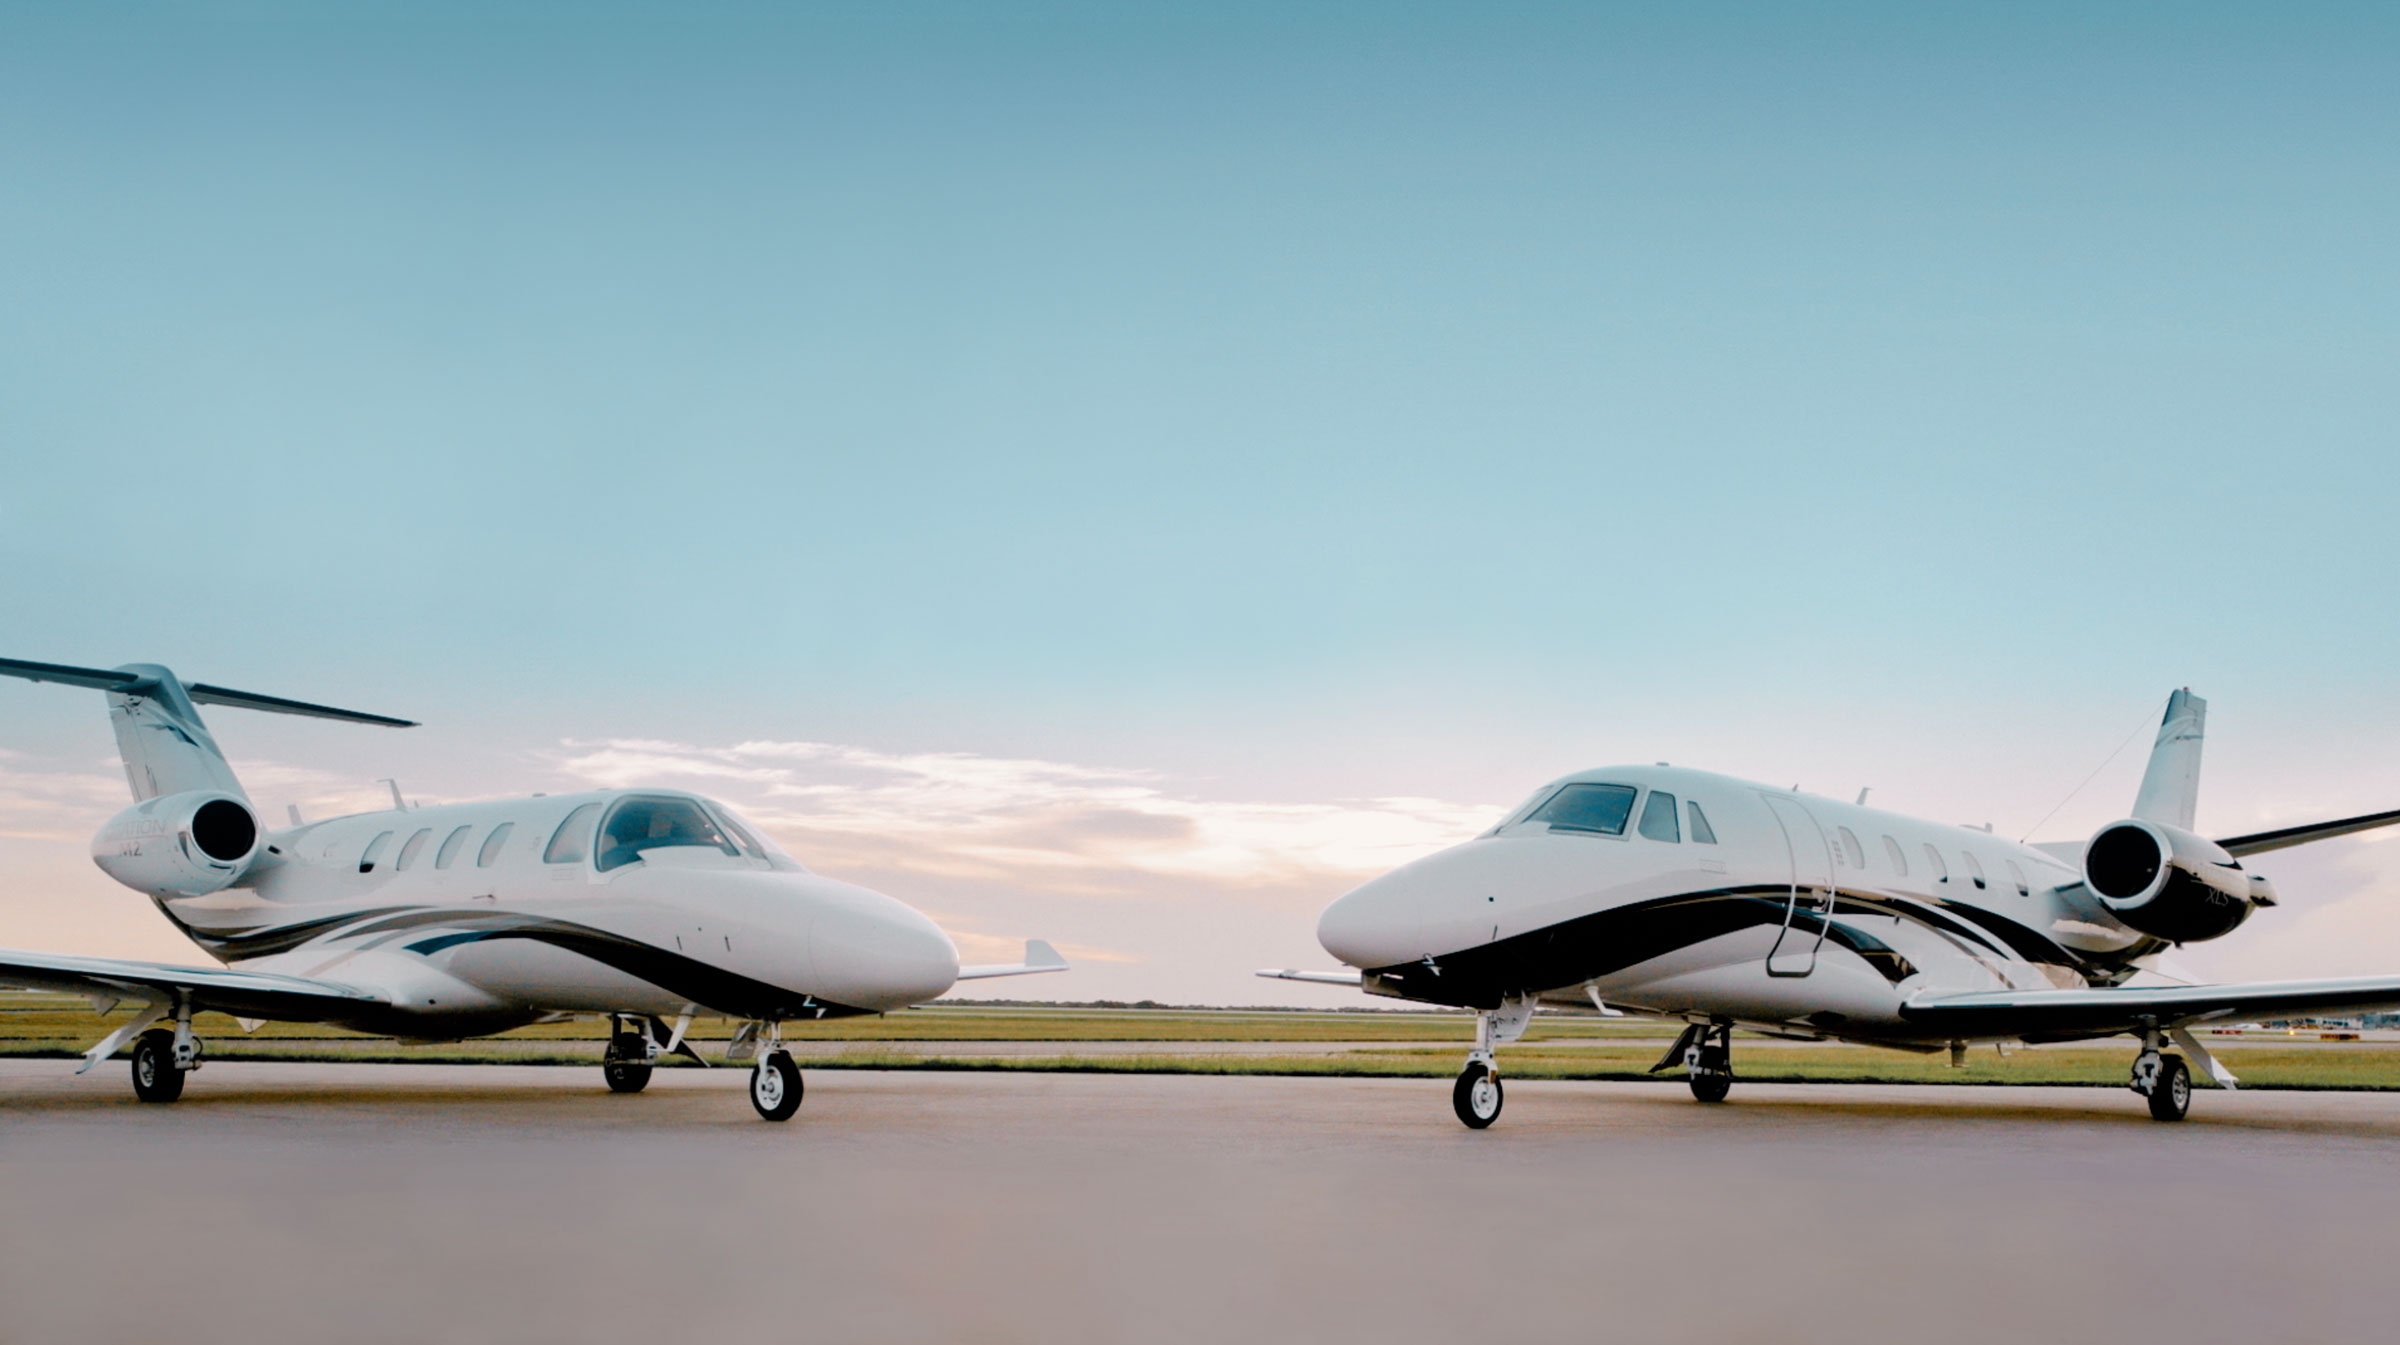 Design and technology unite in the new Cessna Citation M2 Gen2 and Citation XLS Gen2 business jets